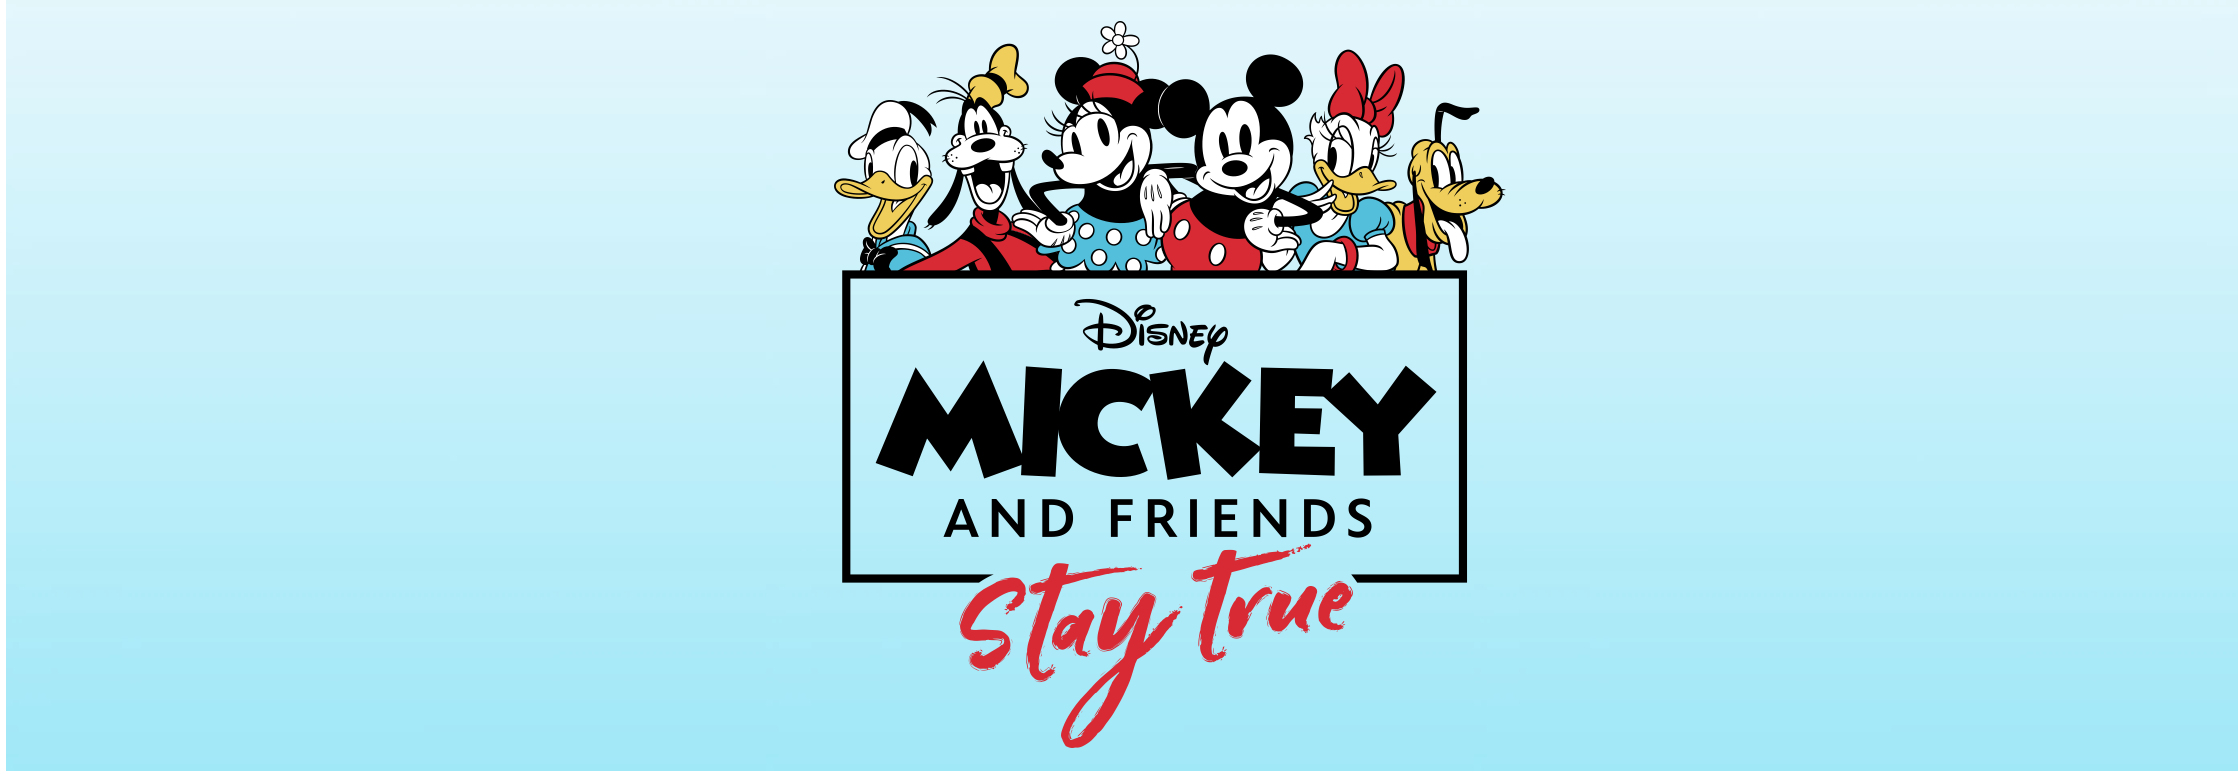 DISNEY BEGINS COUNTDOWN TO INTERNATIONAL FRIENDSHIP DAY WITH LAUNCH OF GLOBAL CAMPAIGN, “MICKEY & FRIENDS: STAY TRUE”